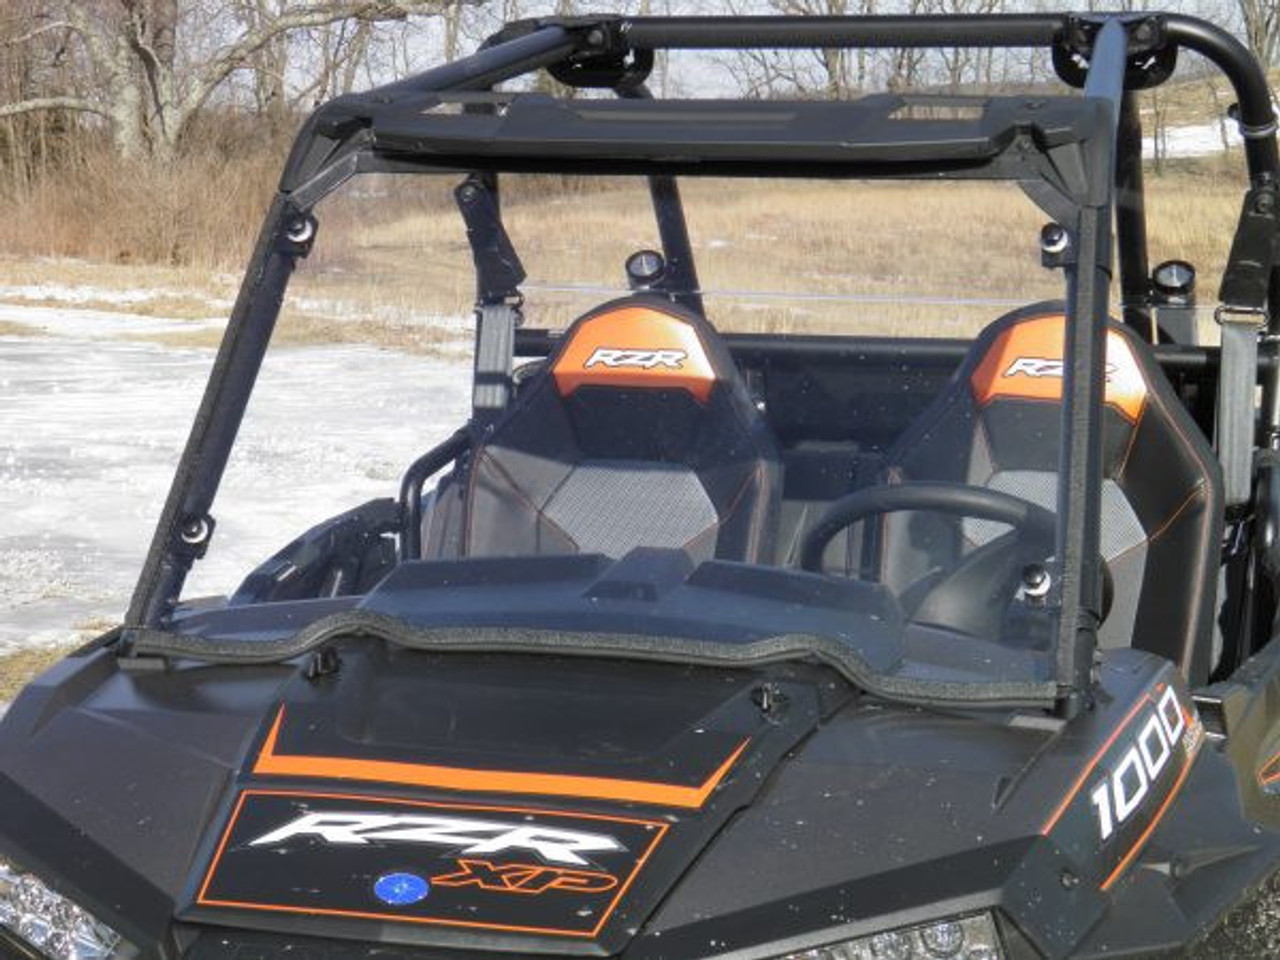 3 Star side x side accessories Polaris RZR XP1000/XP Turbo/S1000 windshield front angle view